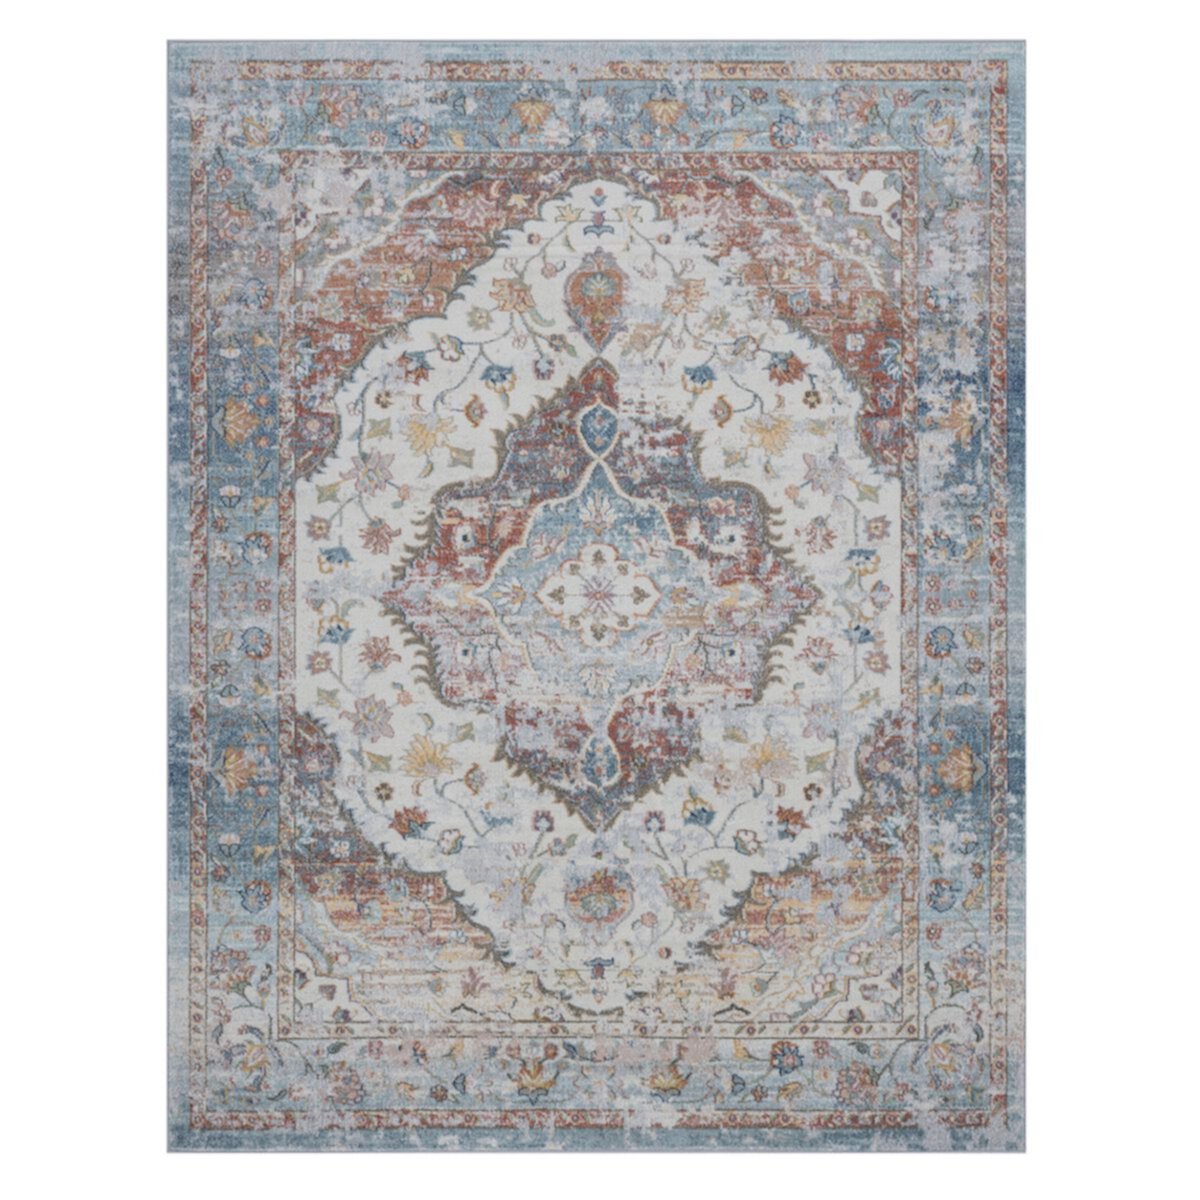 KHL Rugs Norah Traditional Ornate Area Rug KHL Rugs